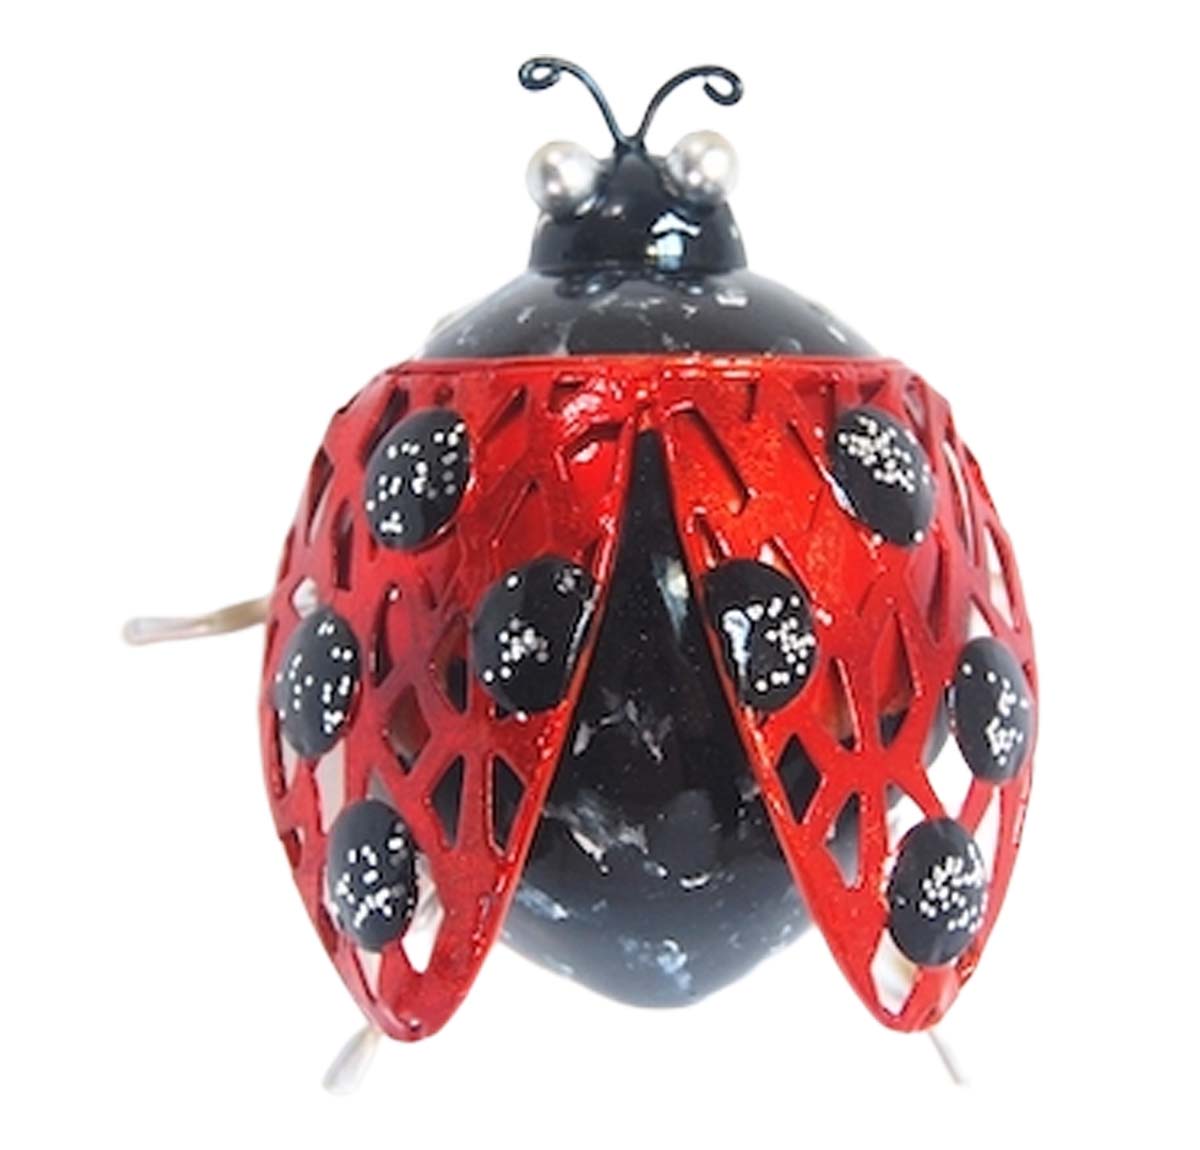 Ladybird small Metal Wall Hanging- Red/Black | Home Decor